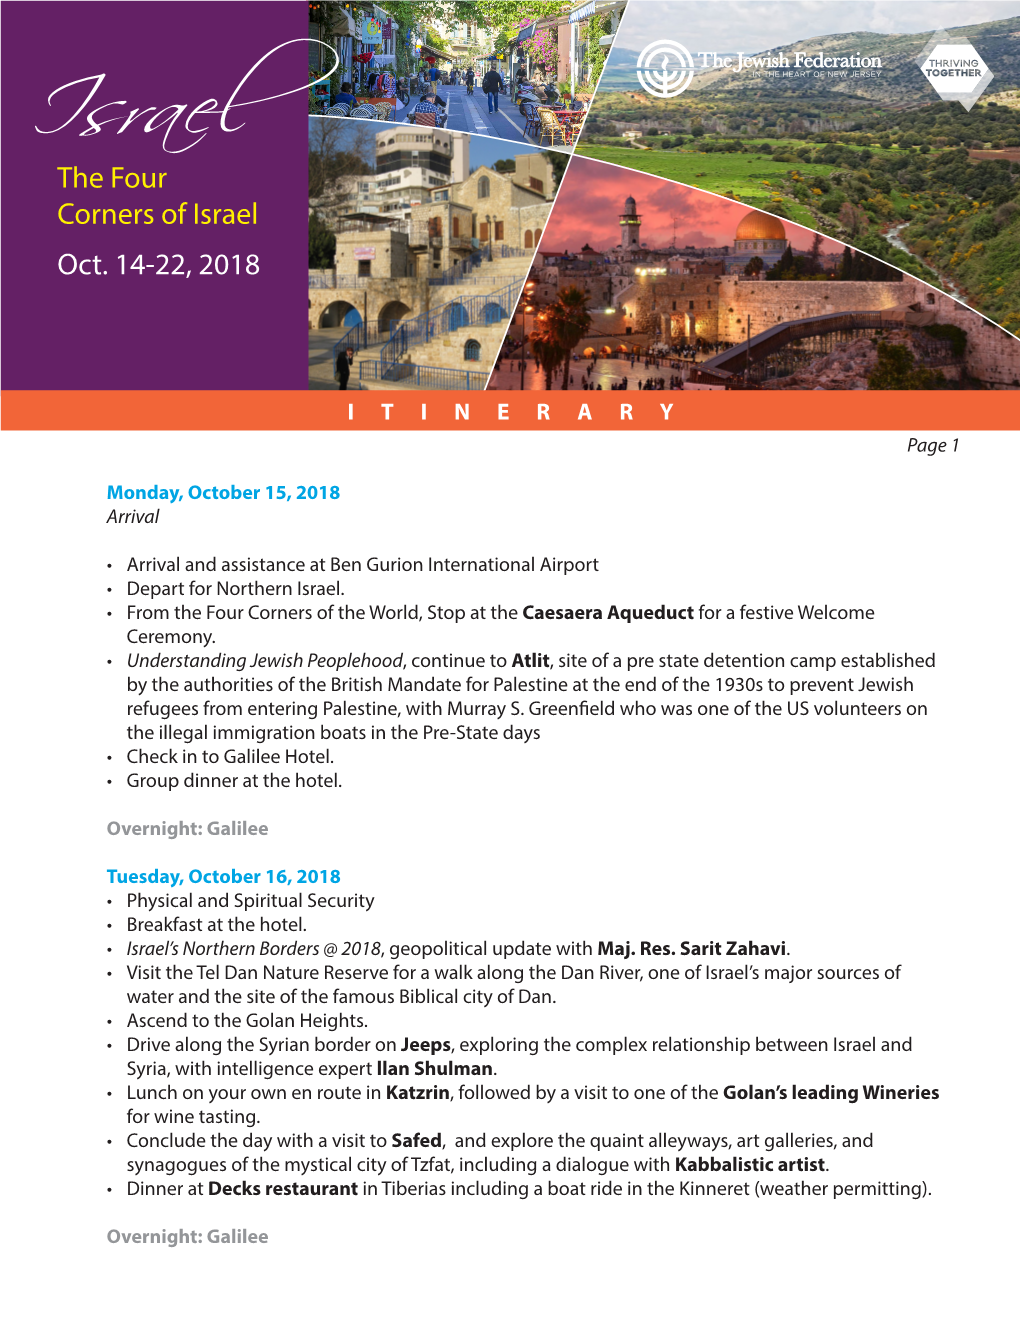 The Four Corners of Israel Oct. 14-22, 2018